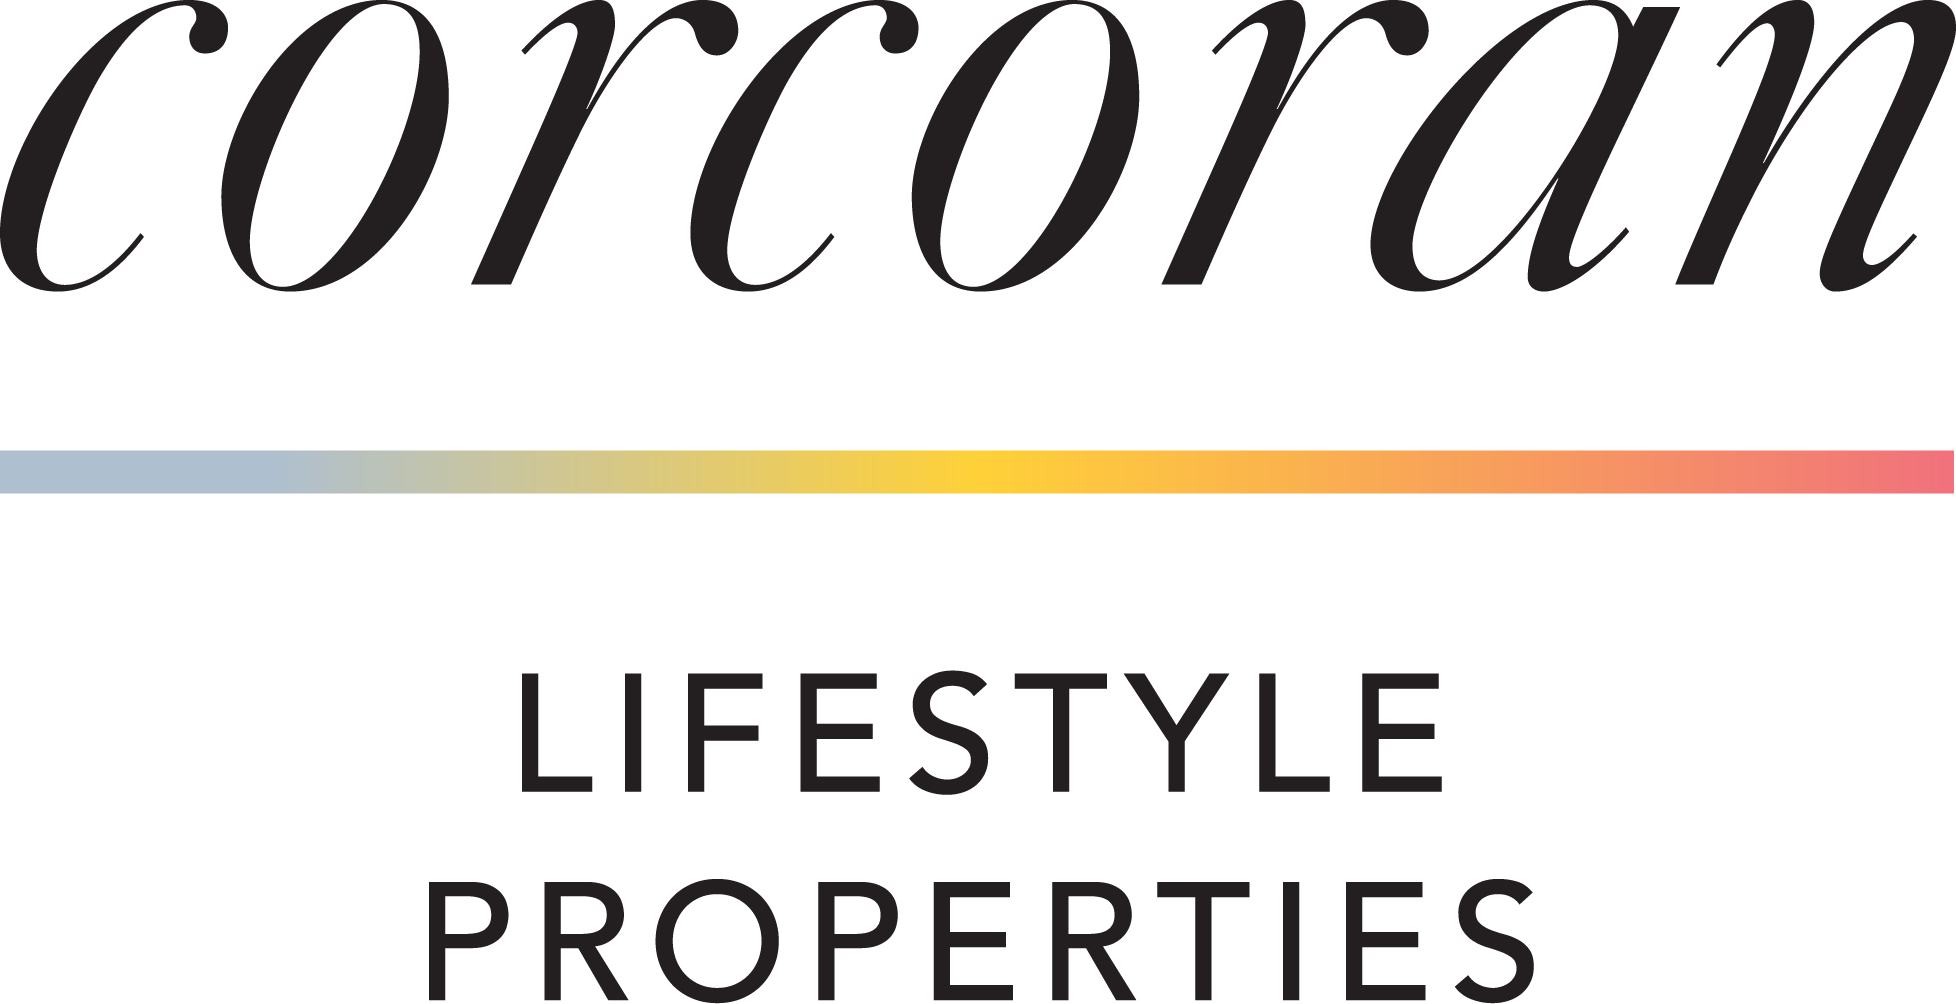 Building presented by Corcoran Lifestyle Properties